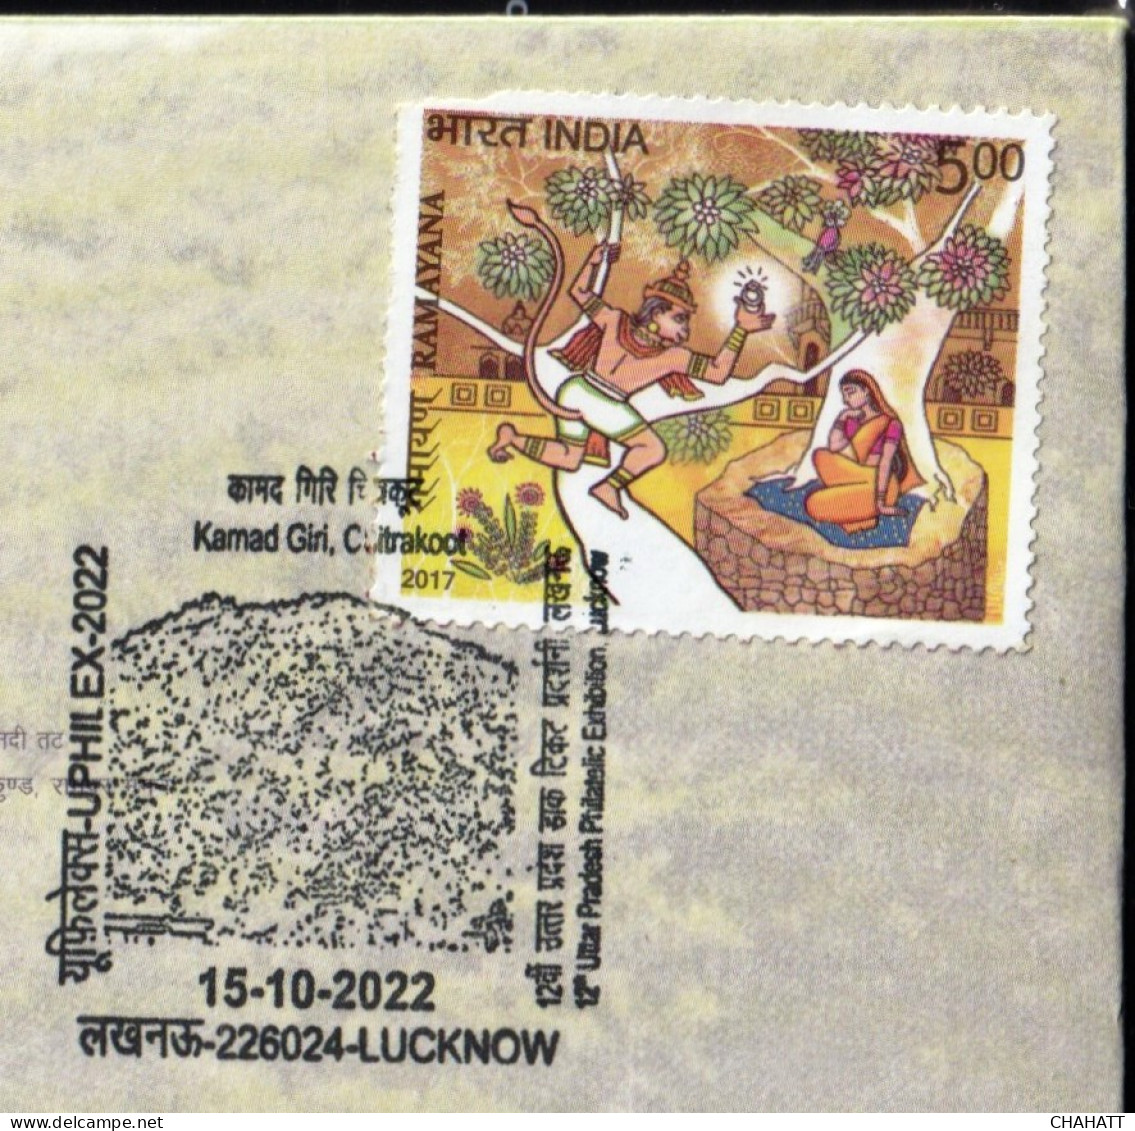 HINDUISM - RAMAYAN- KAMAD GIRI, FOREST HILLS OF CHITRAKOOT-PICTORIAL CANCELLATION - SPECIAL COVER - INDIA -2022- BX4-23 - Hinduism